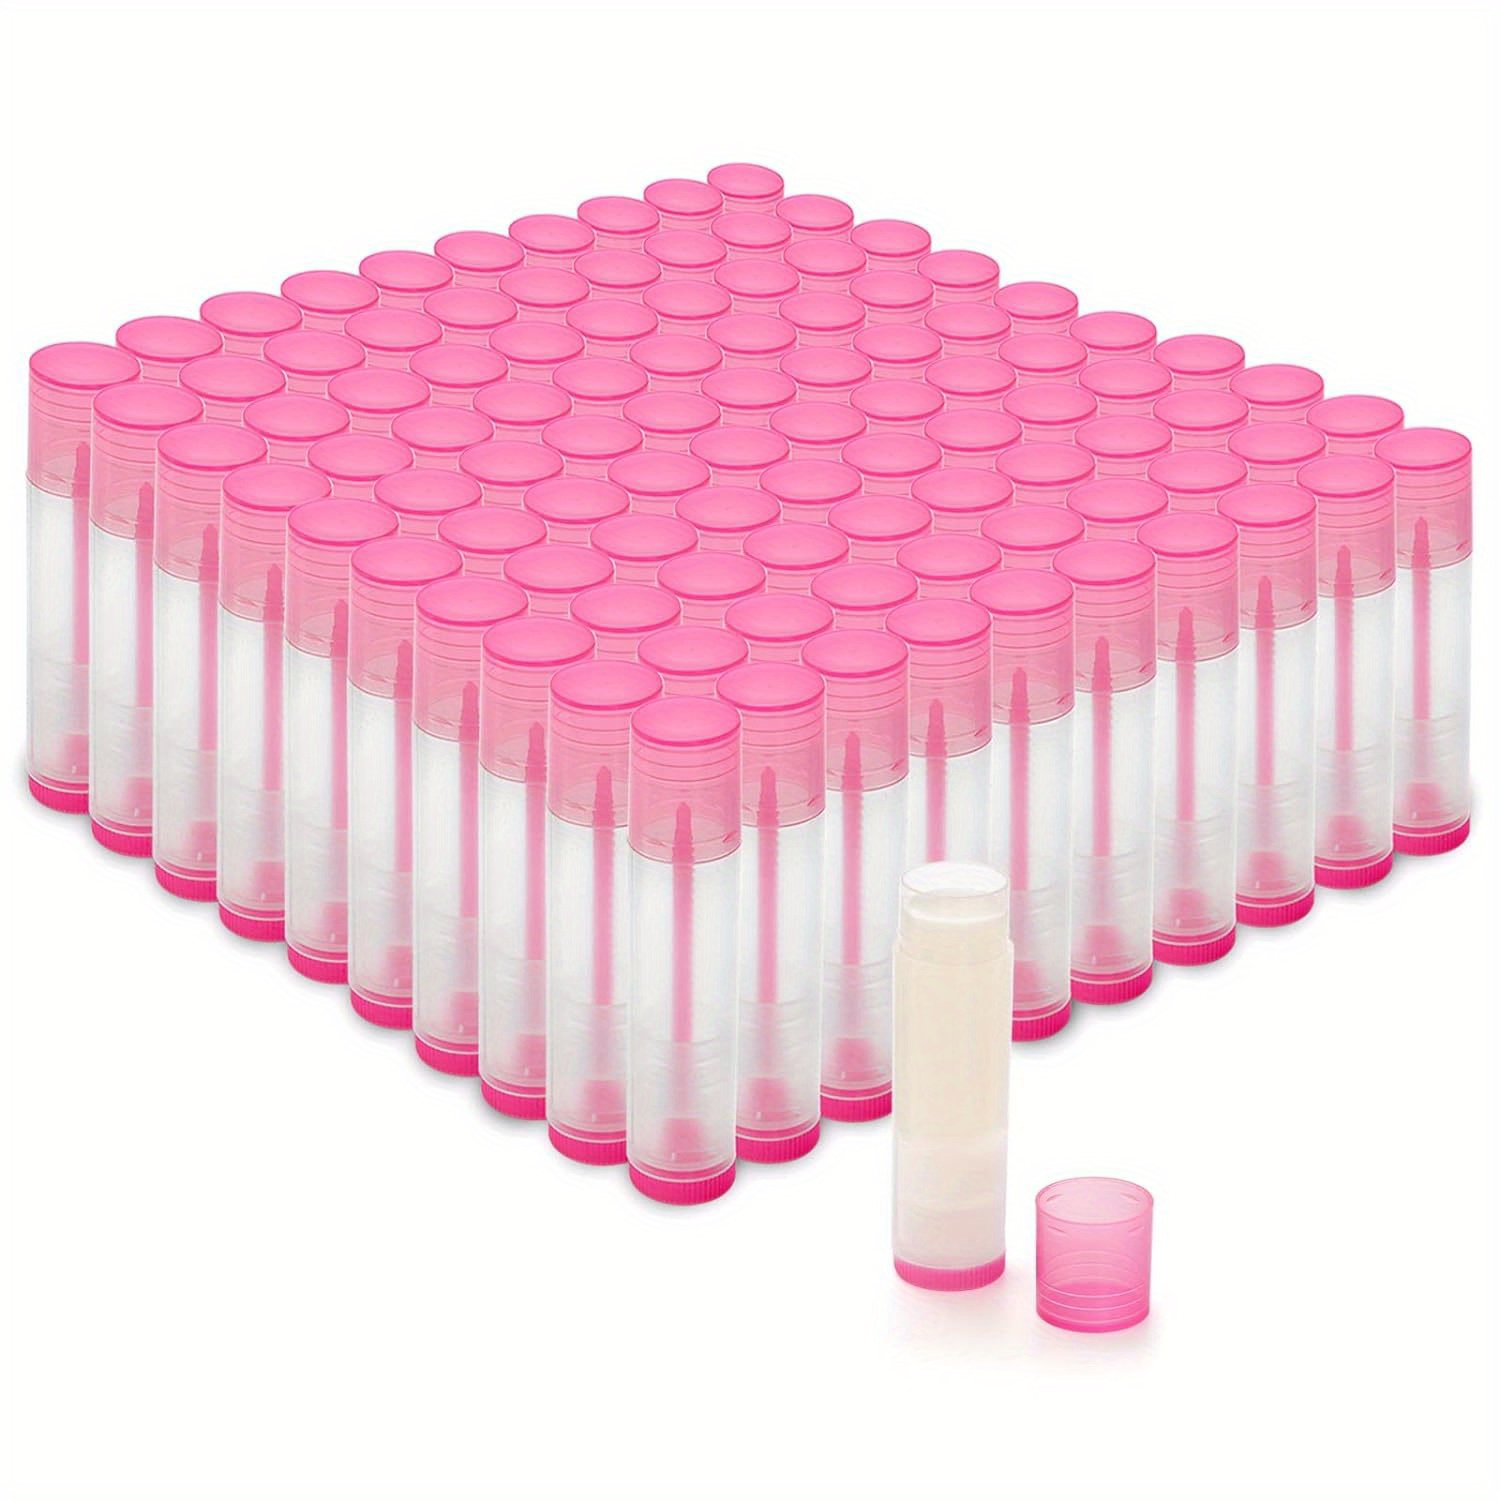 

30/50/100pcs Lip Balm Tubes Empty, 5.5ml Lip Balm Container With Caps, Lipstick Tube - Pink - Travel Accessories